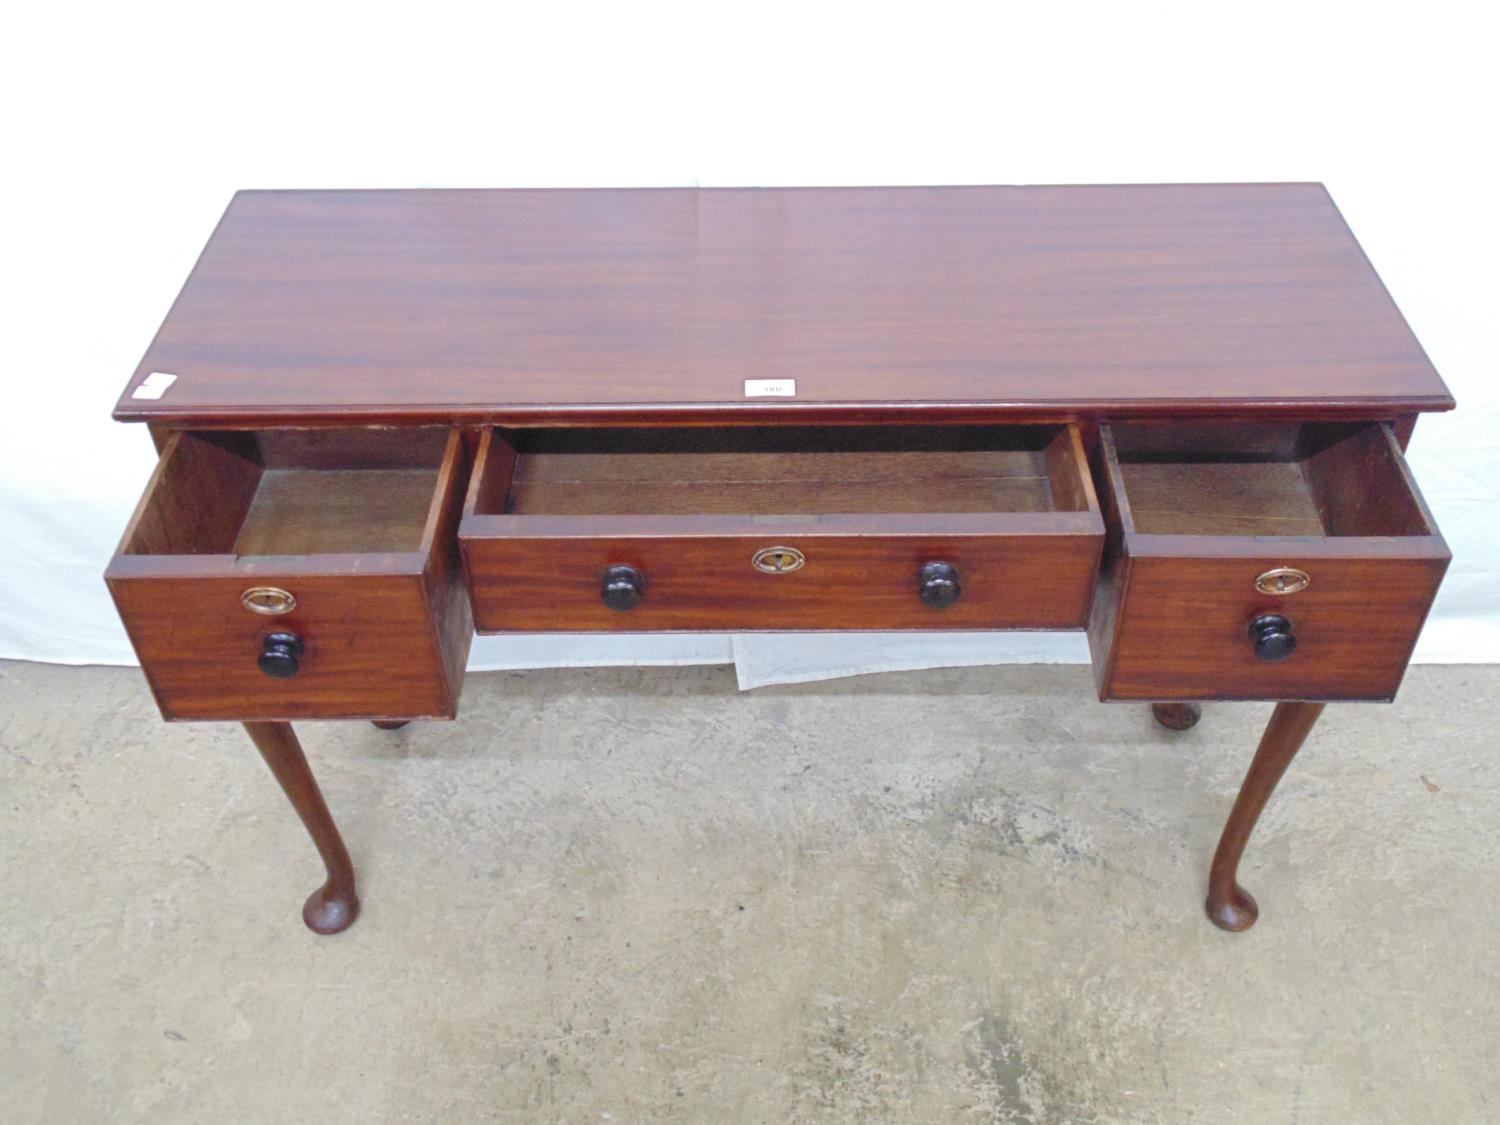 Mahogany side table having three drawers with knob handles, standing on cabriole legs ending in - Image 2 of 2